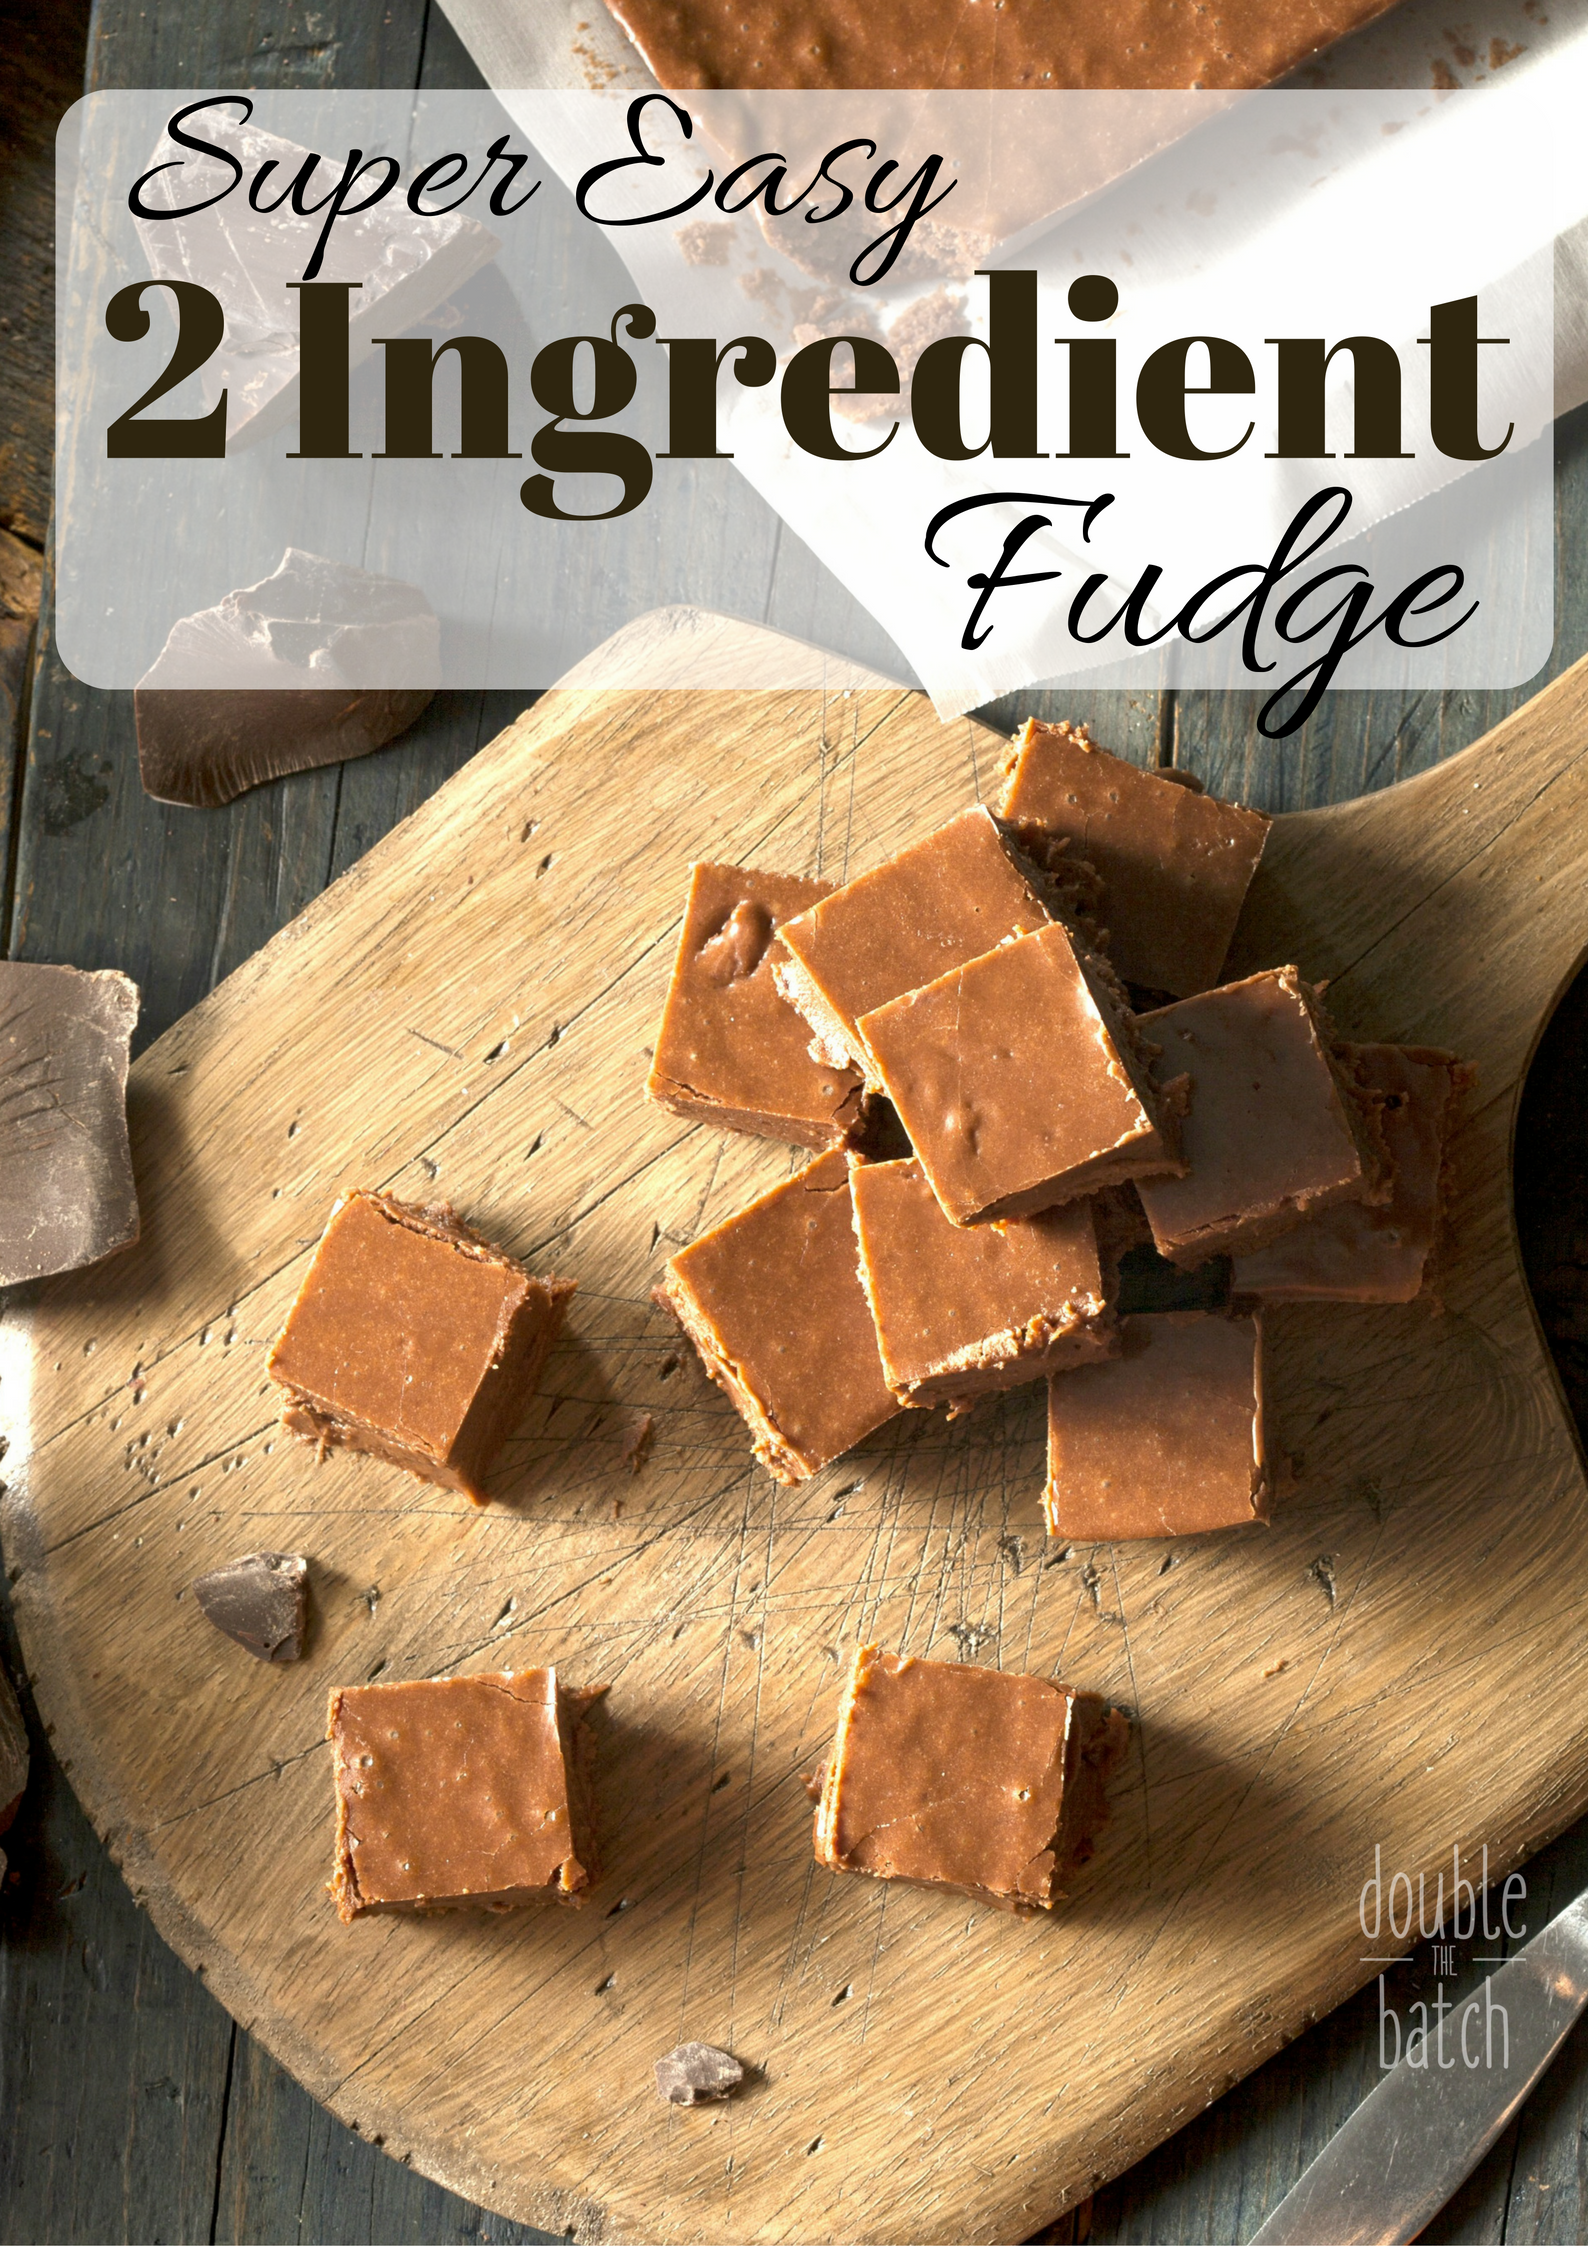 Super easy TWO INGREDIENT fudge! You probably have both of the ingredients in your cupboard already.